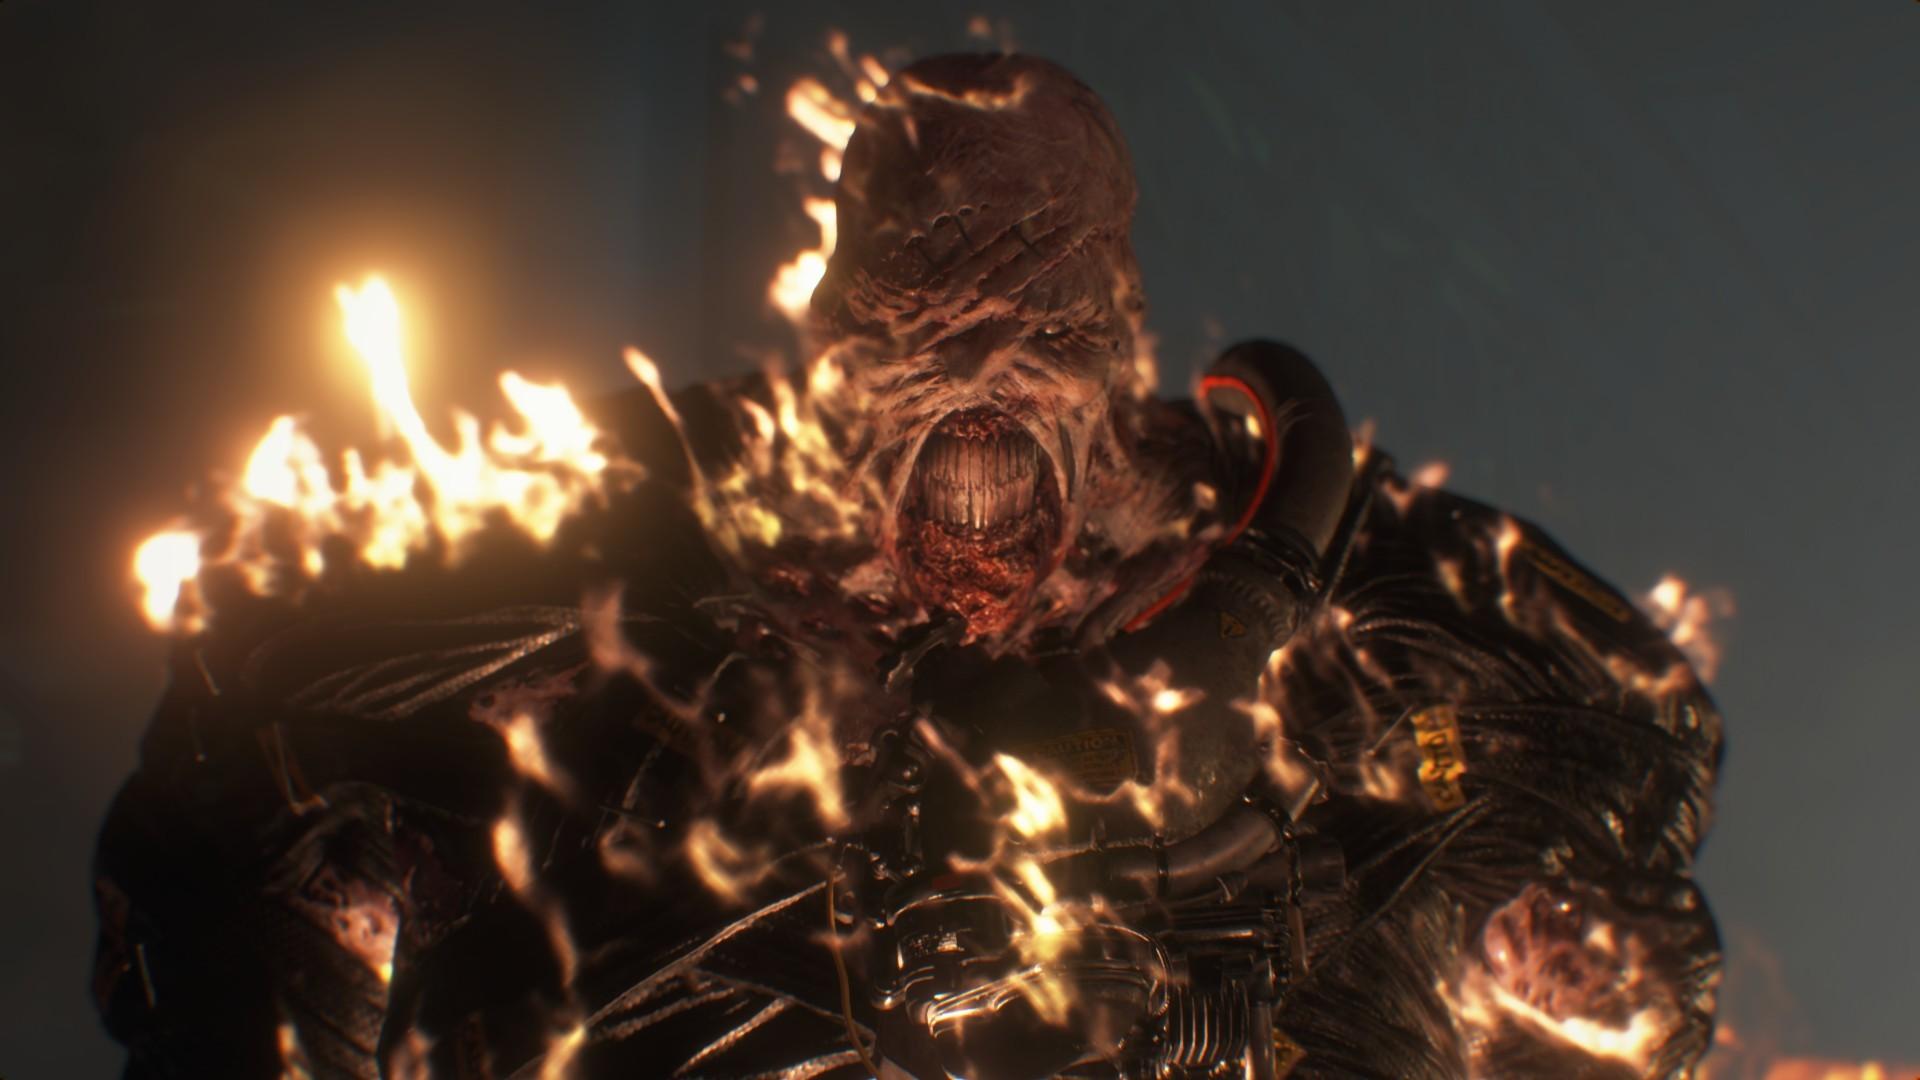 Resident Evil 3 Remake's Newest Trailer Showcases Nemesis And